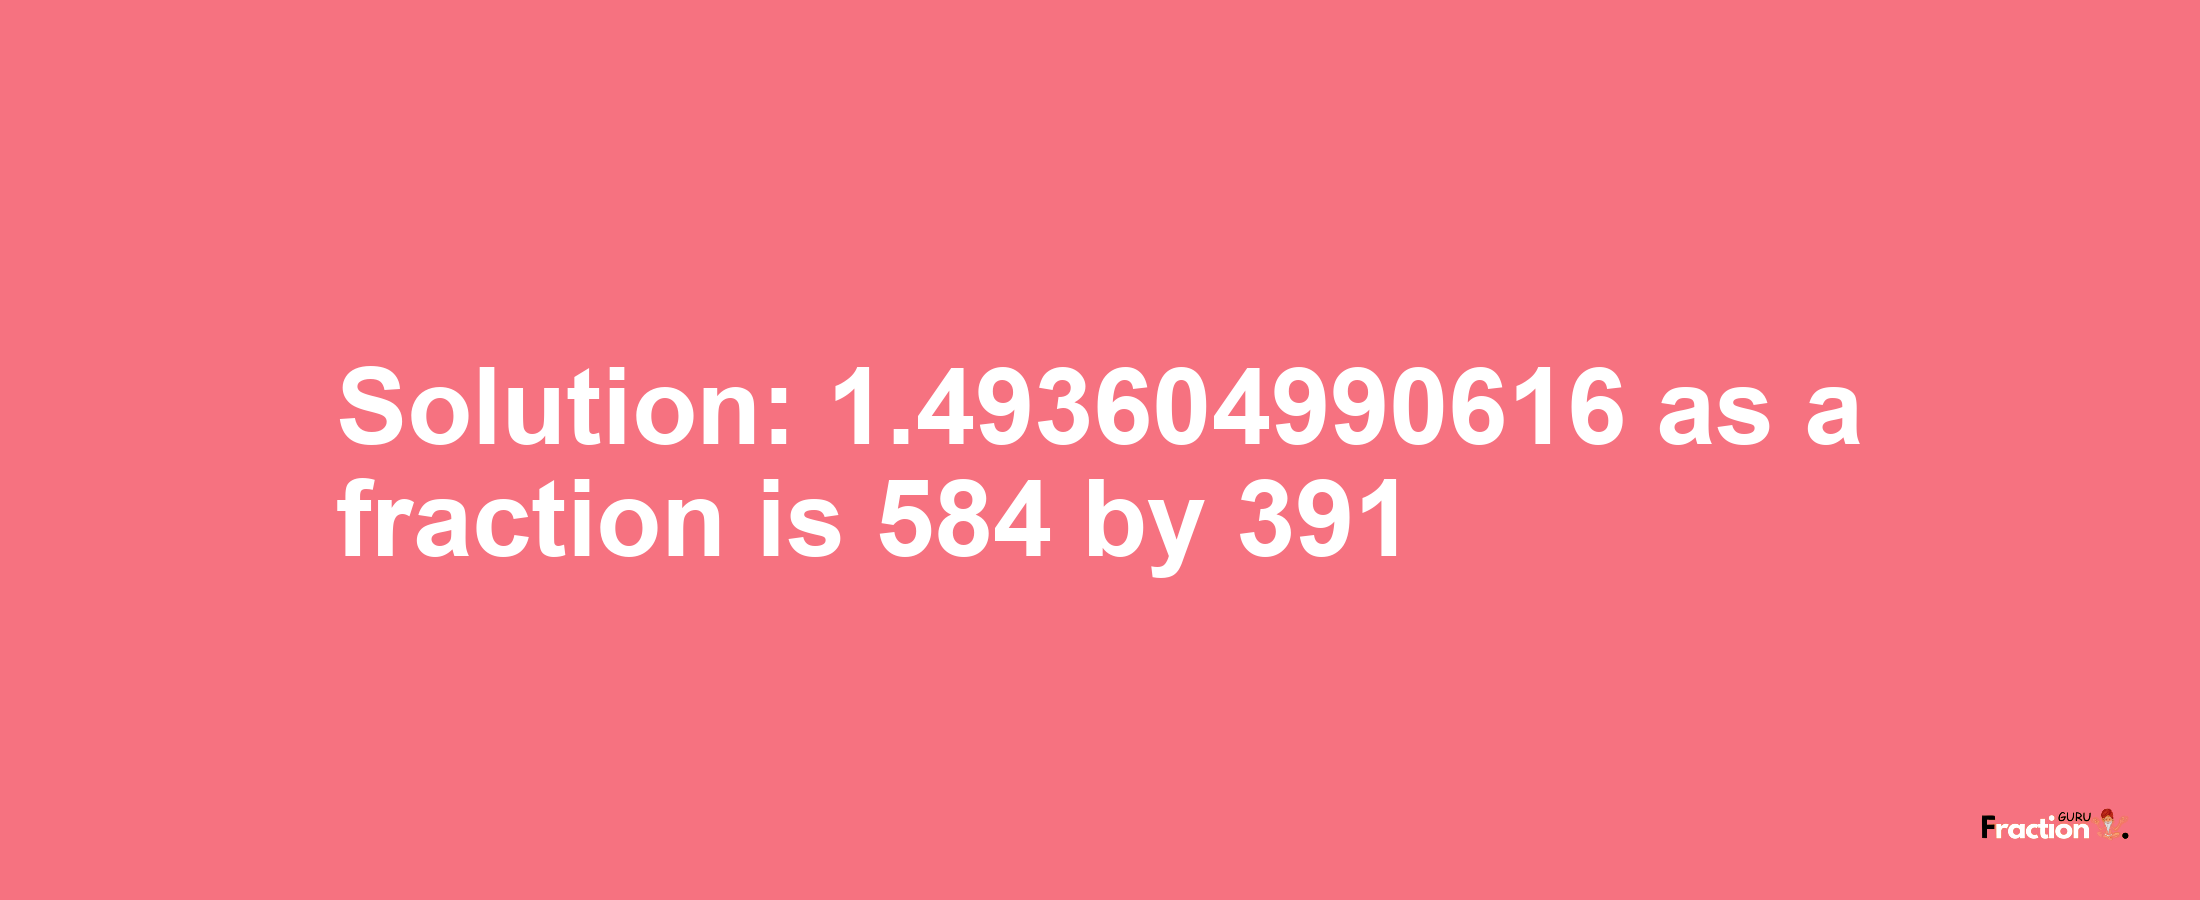 Solution:1.493604990616 as a fraction is 584/391